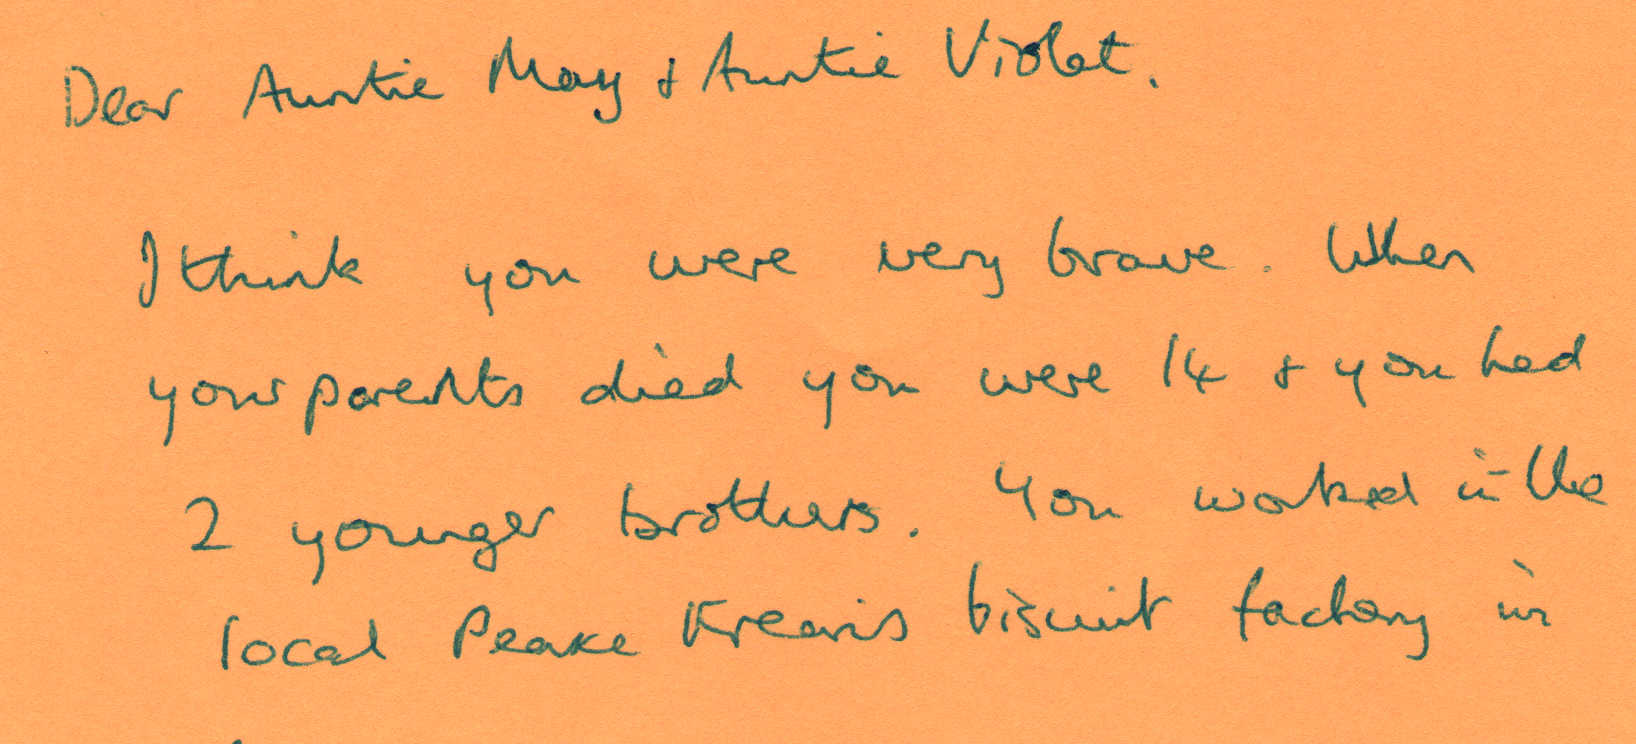 Letter to Auntie May,Auntie Violet from June Westley